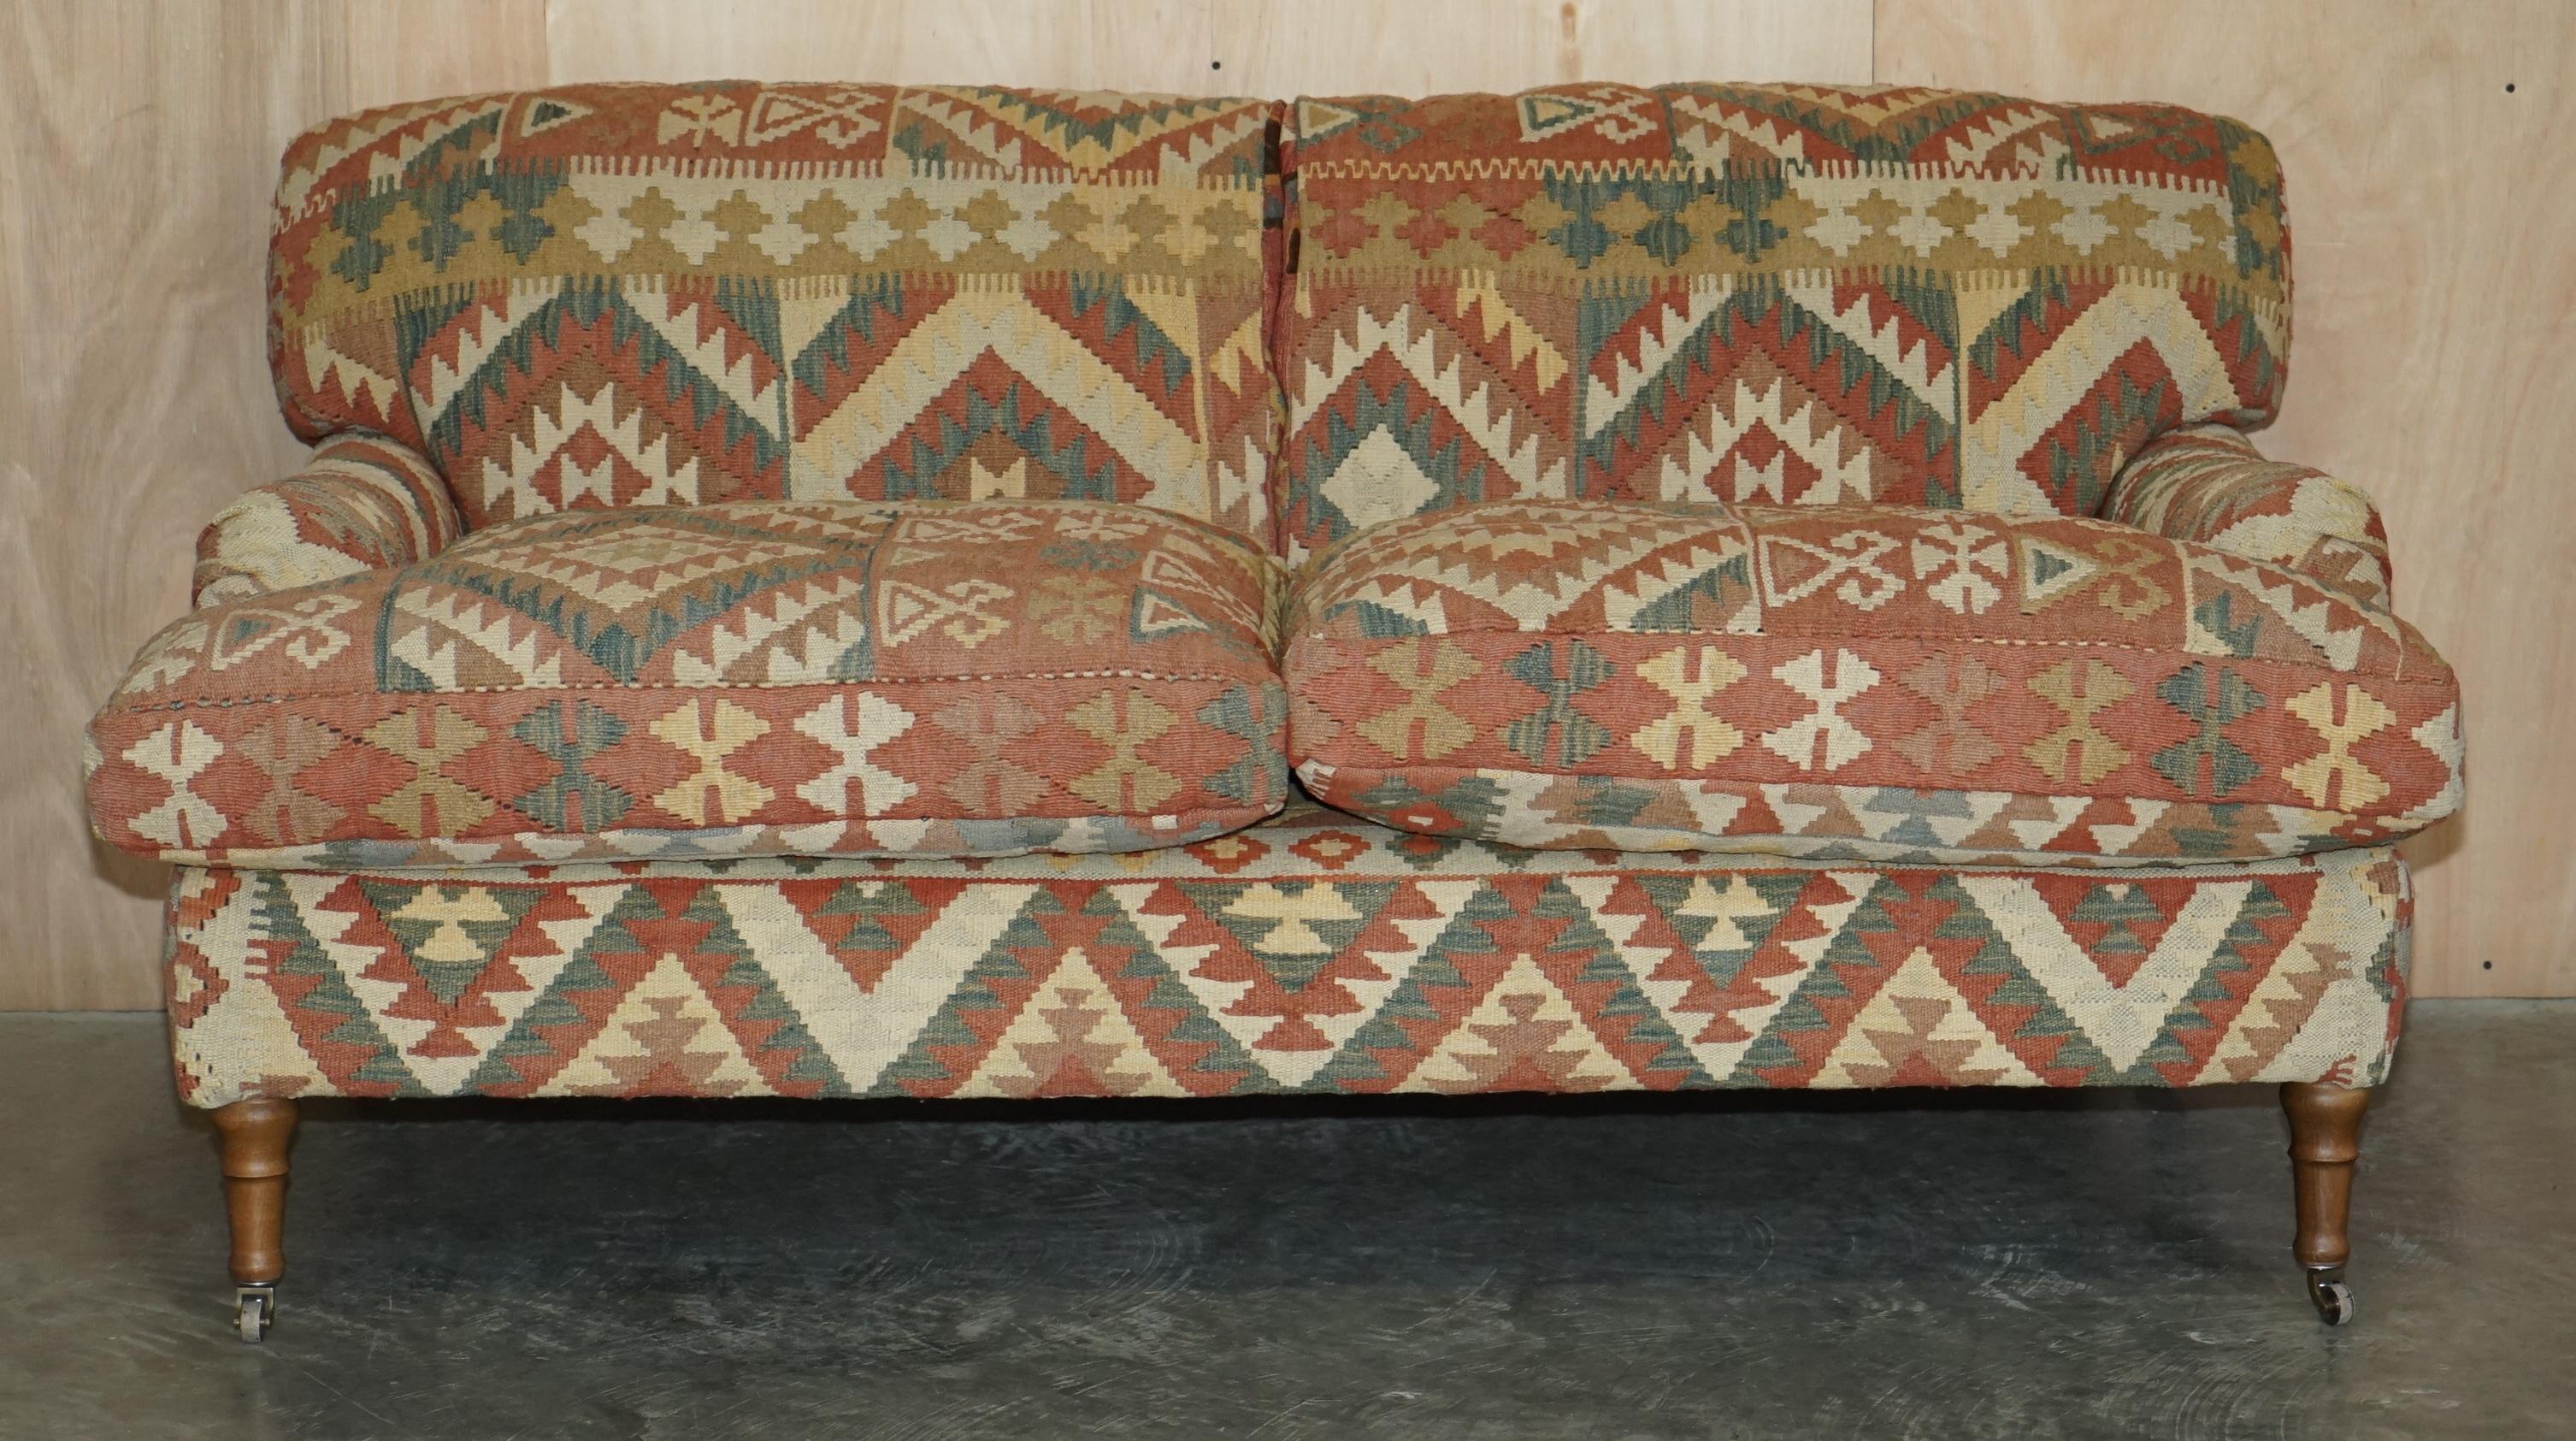 We are delighted to offer for sale this hand made in England, George Smith Signature Standard arm style, feather cushion back and base, Kilim and brown leather upholstered sofa with over stuffed feather filled cushions

A very good looking well